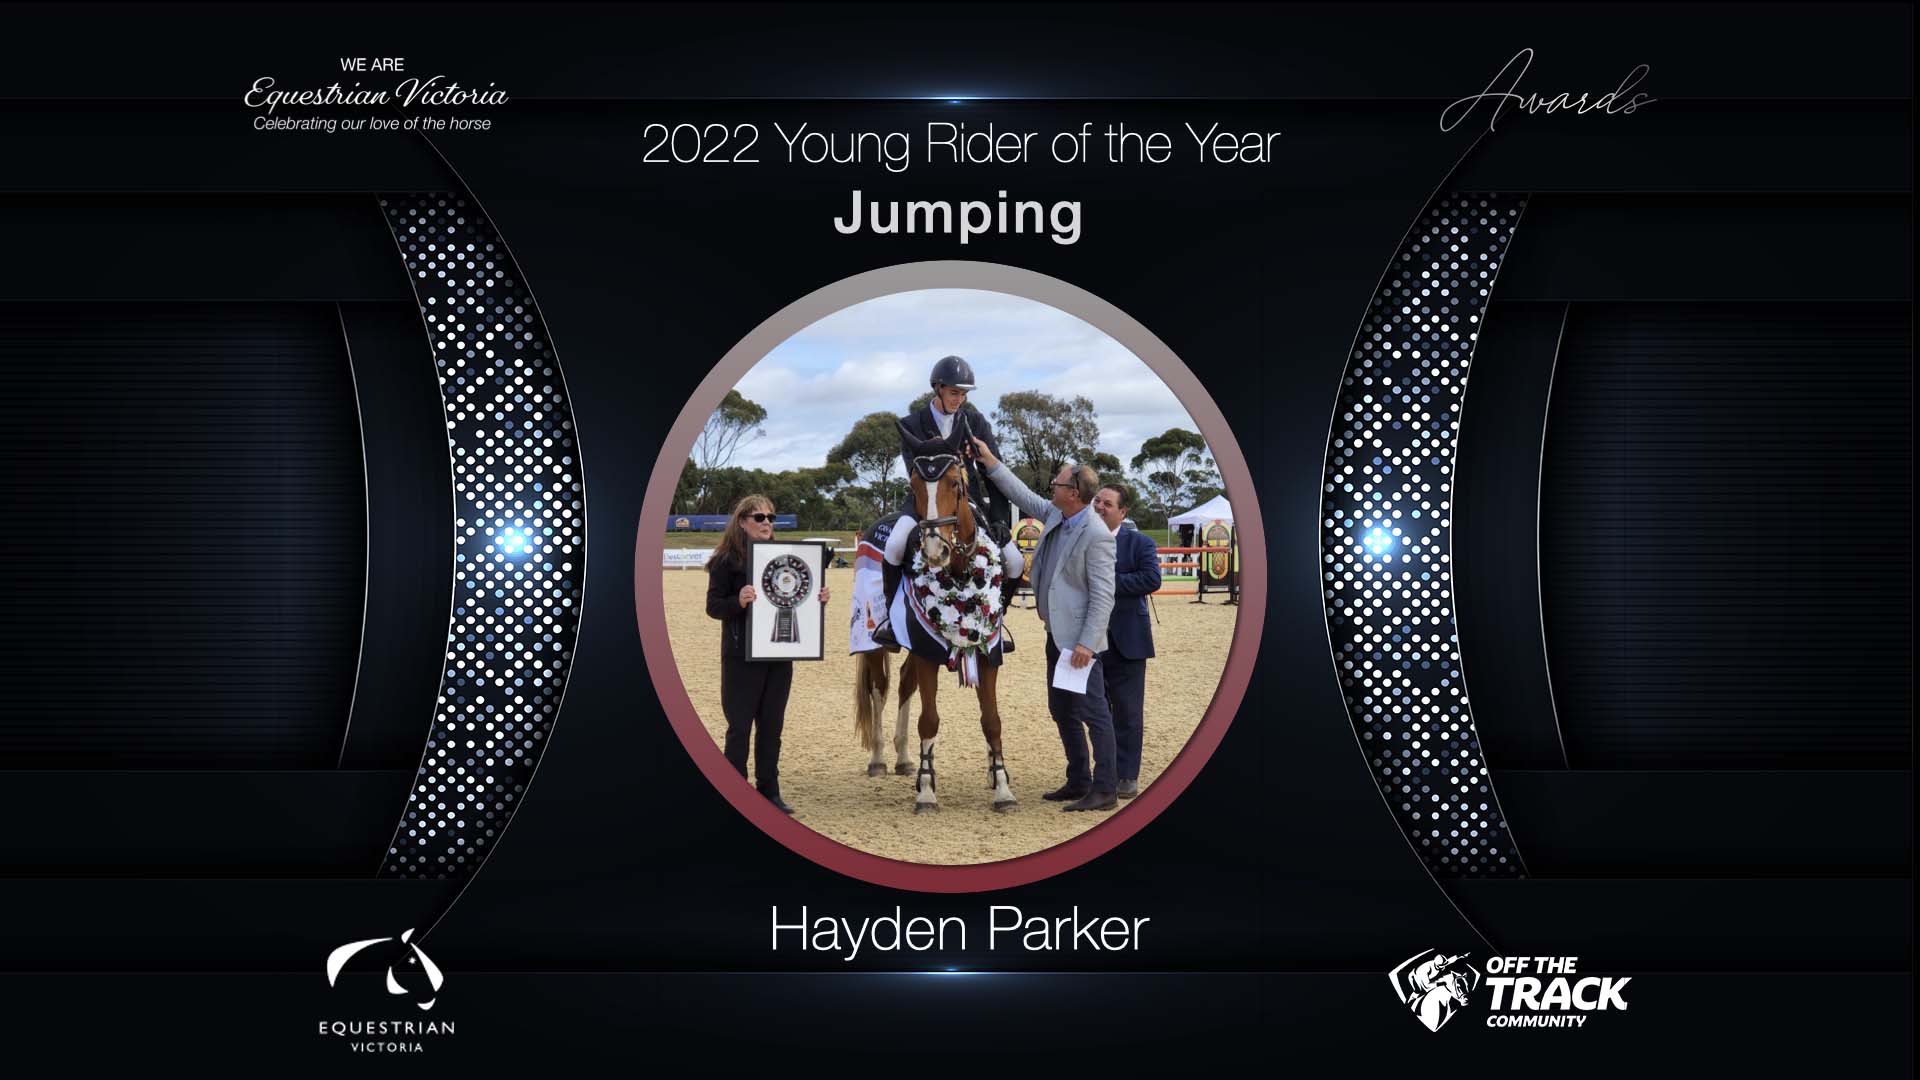 2022 Young Rider of the Year - Jumping